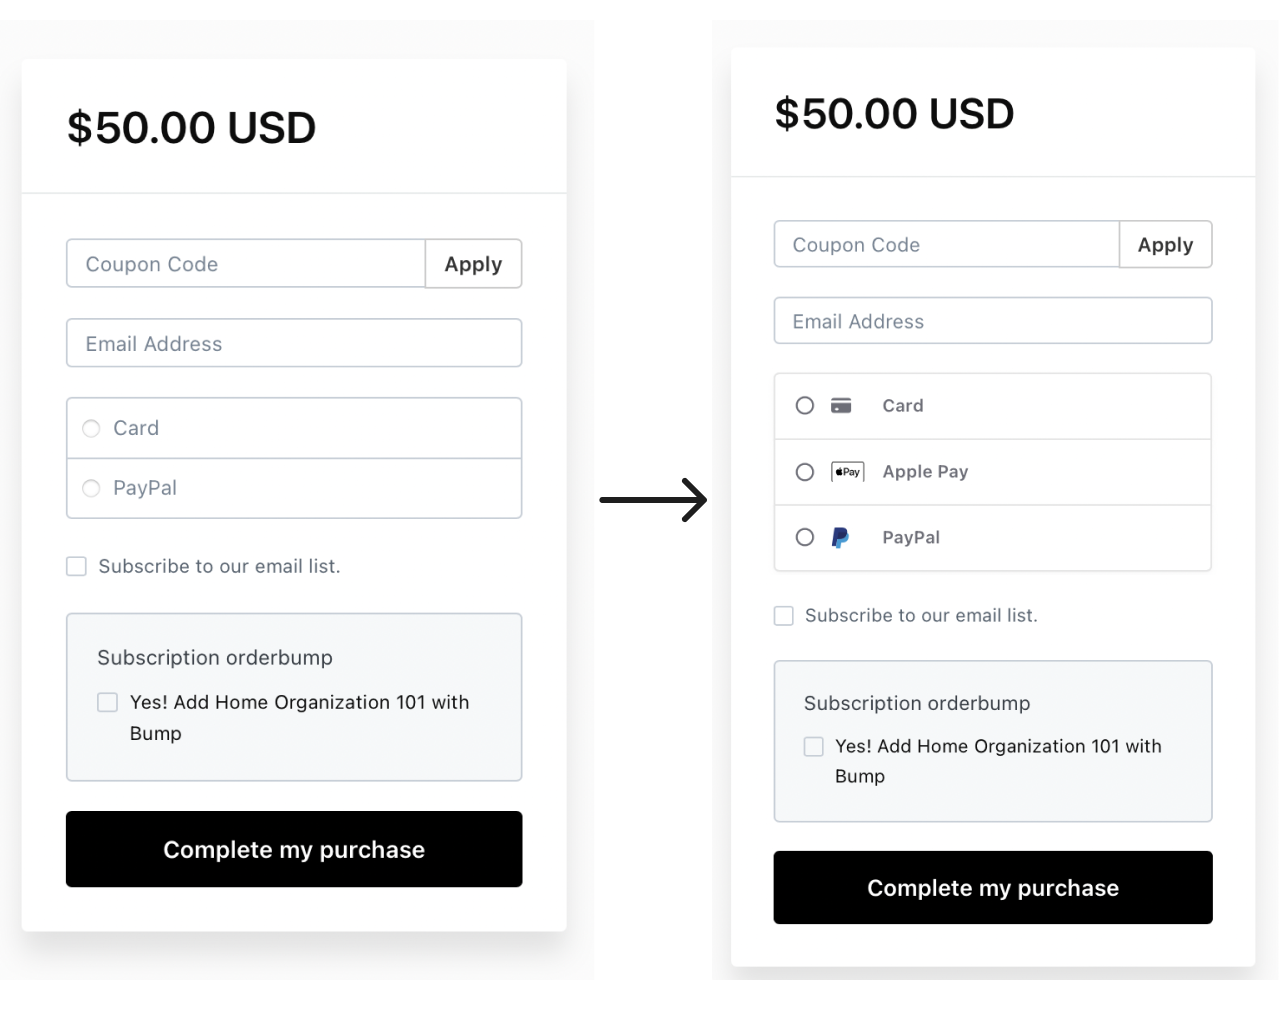 how-to-enable-apple-pay-on-kajabi-payments-offers-hc-draft-google-docs-0